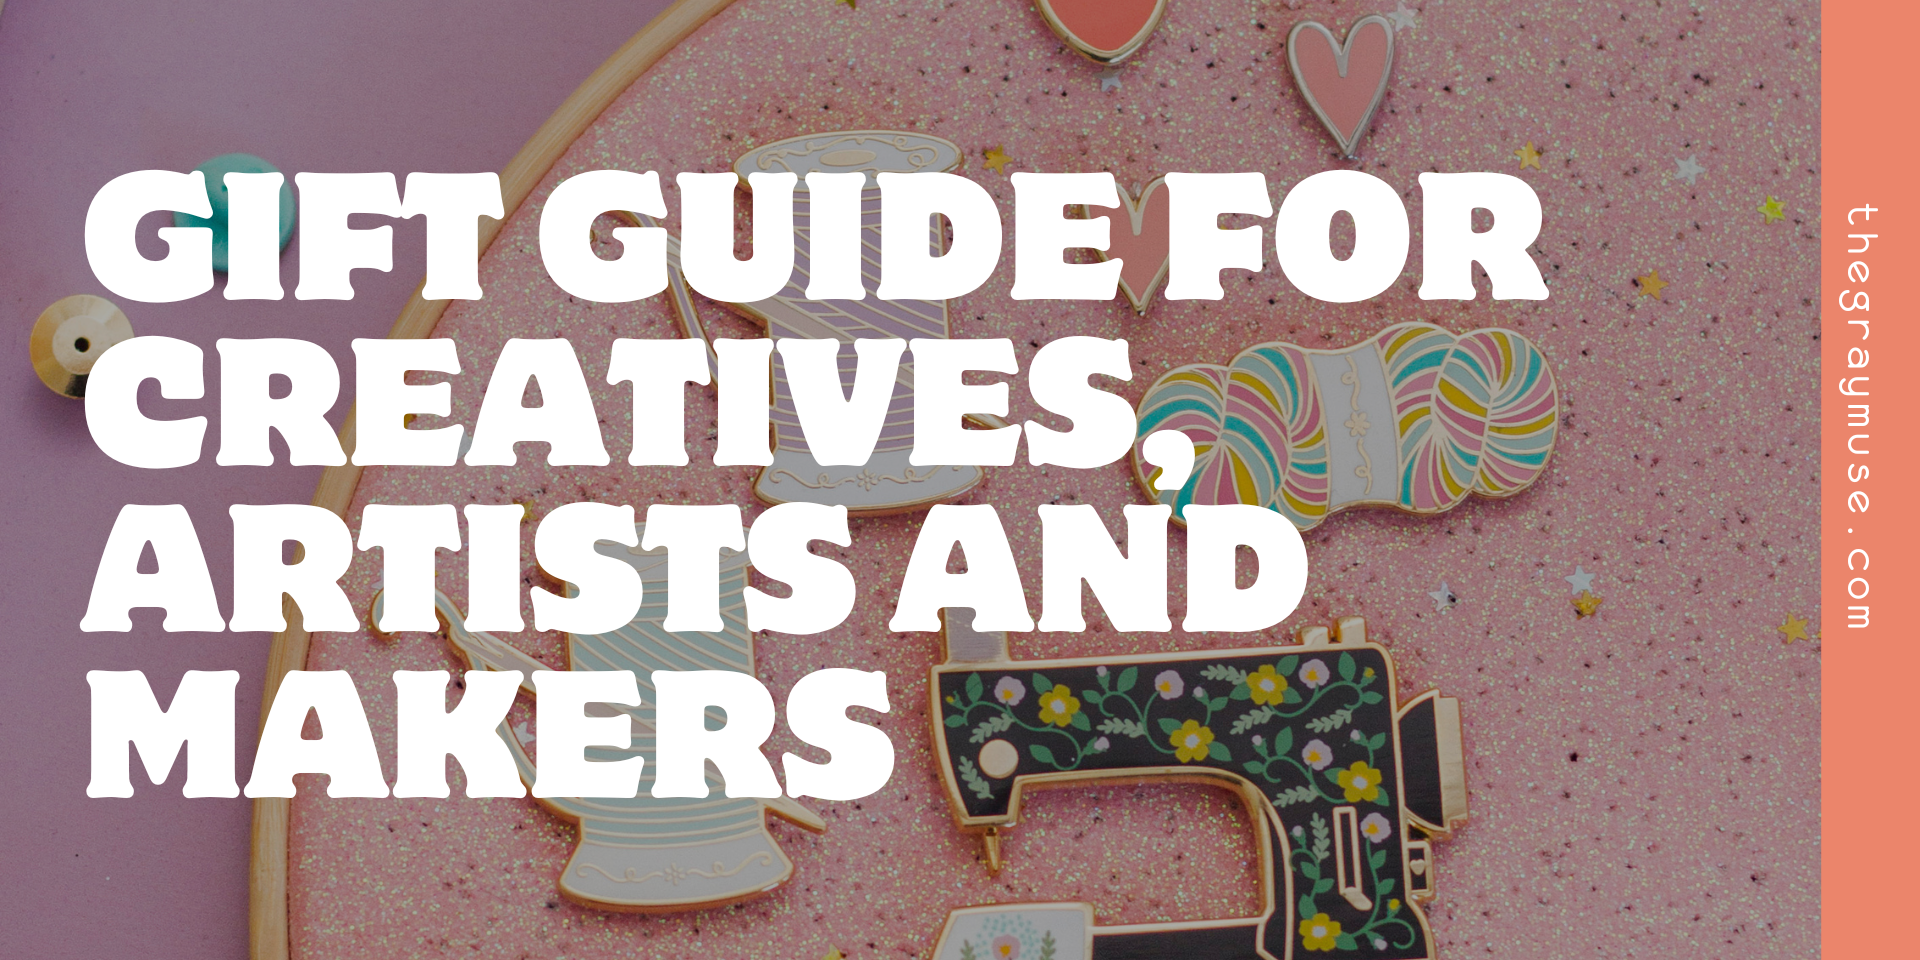 Gift Guide for Creatives, Artists and Makers